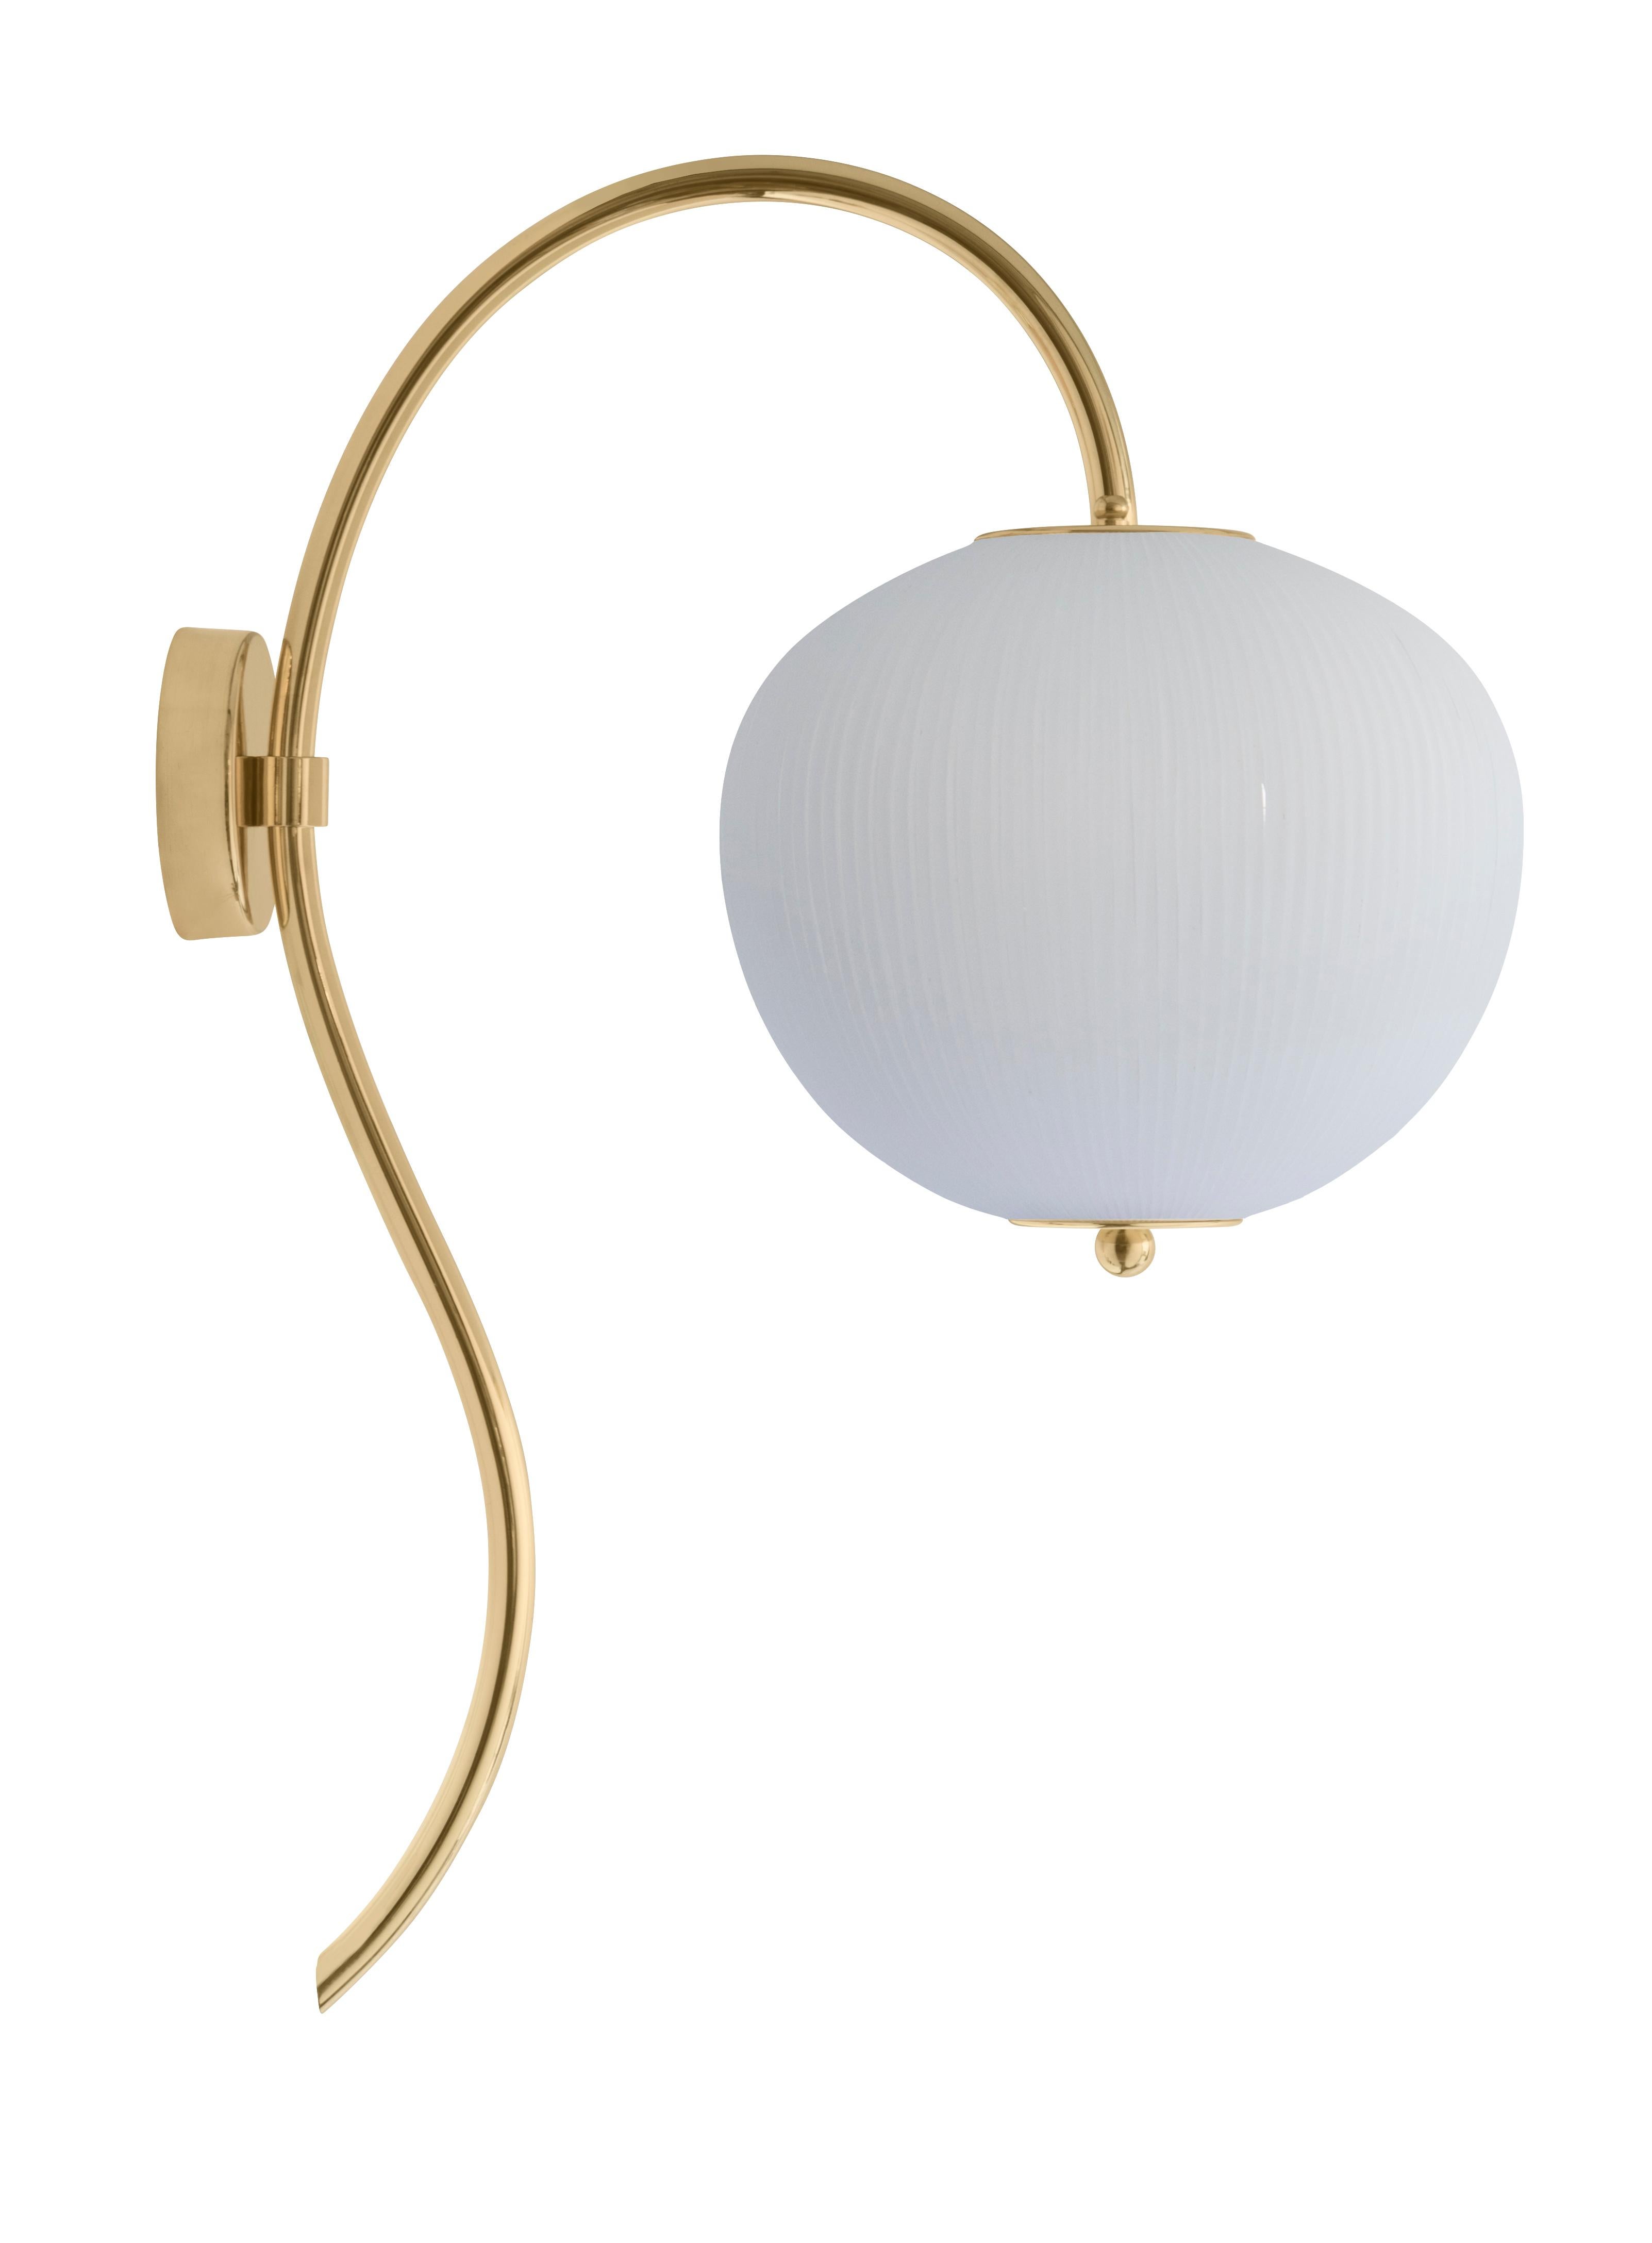 Wall lamp China 03 by Magic Circus Editions
Dimensions: H 62 x W 26.2 x D 41.5 cm
Materials: Brass, mouth blown glass sculpted with a diamond saw
Colour: rich grey

Available finishes: Brass, nickel
Available colours: enamel soft white, soft